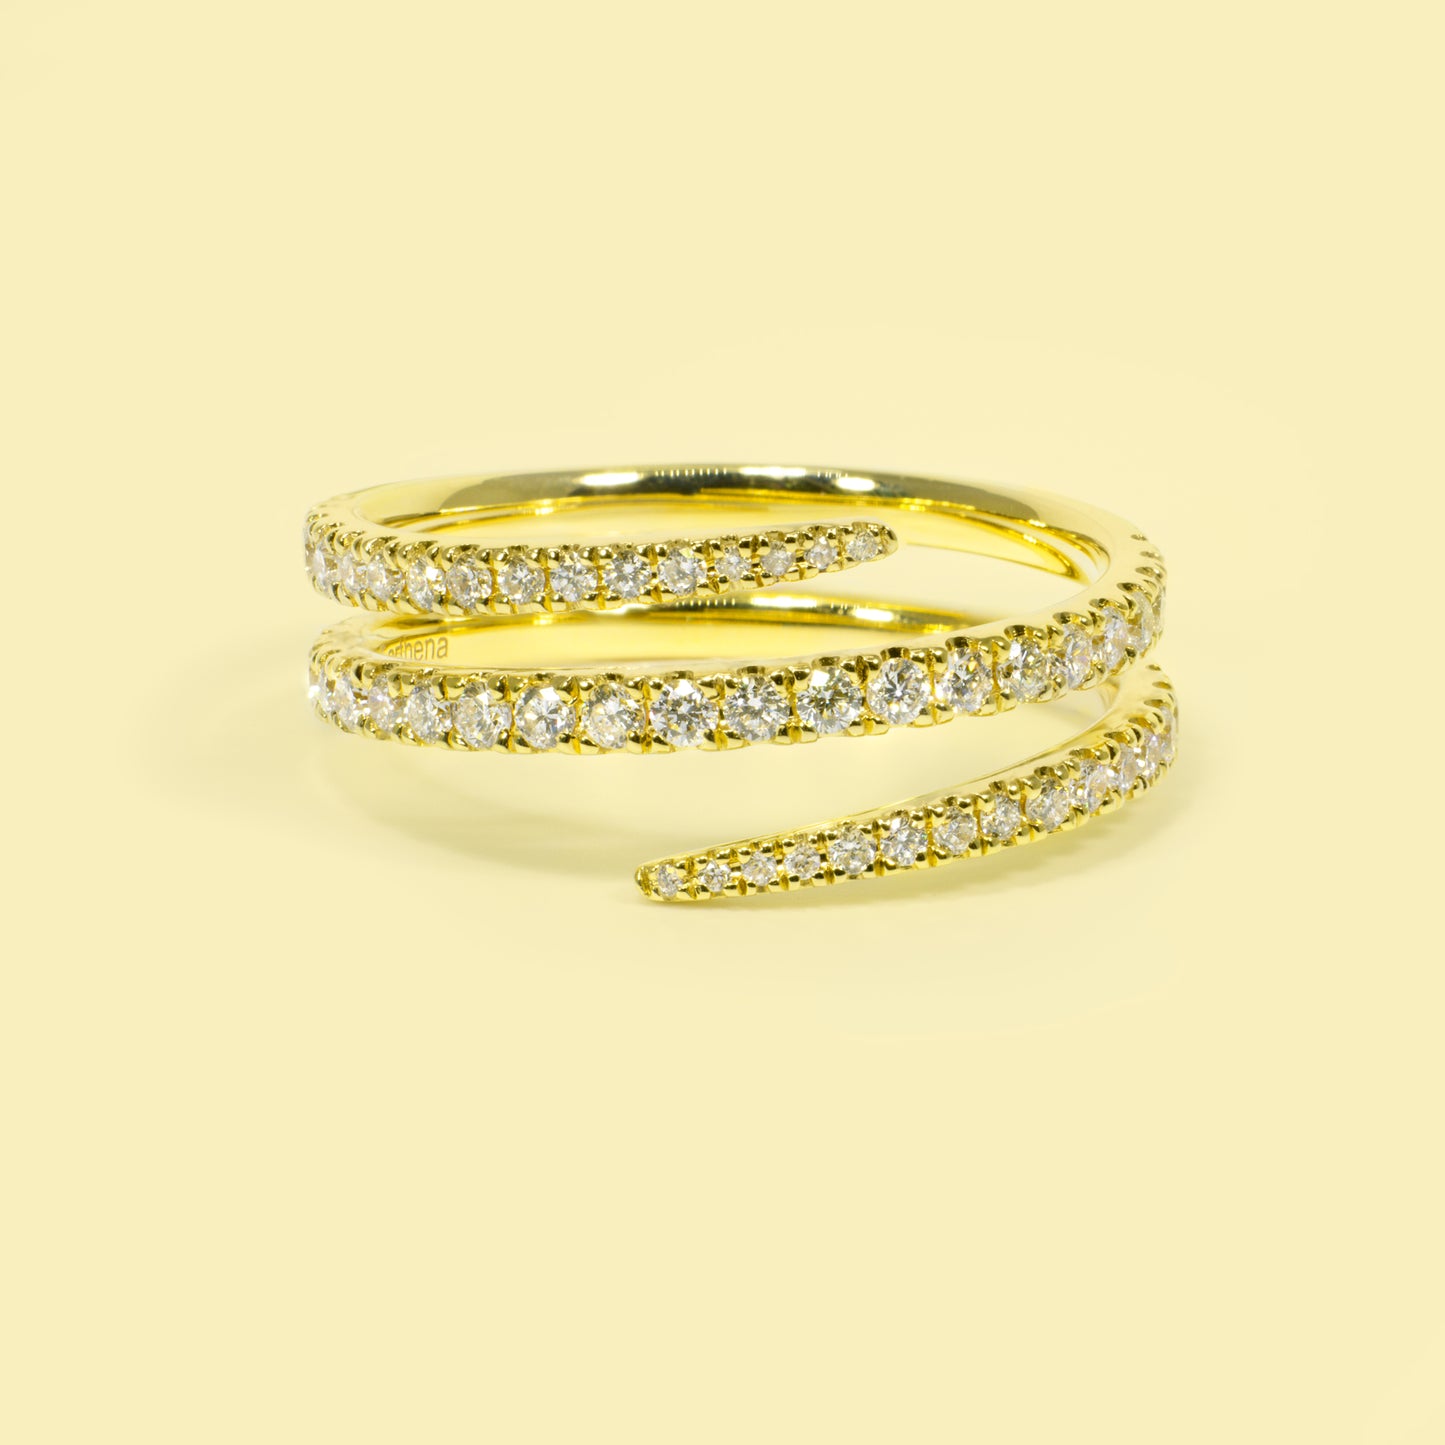 Shae Triple Wrap Stackable Coil Lab-grown Diamond Ring Handcrafted in 14K or 18K Solid Gold by Earthena Jewelry